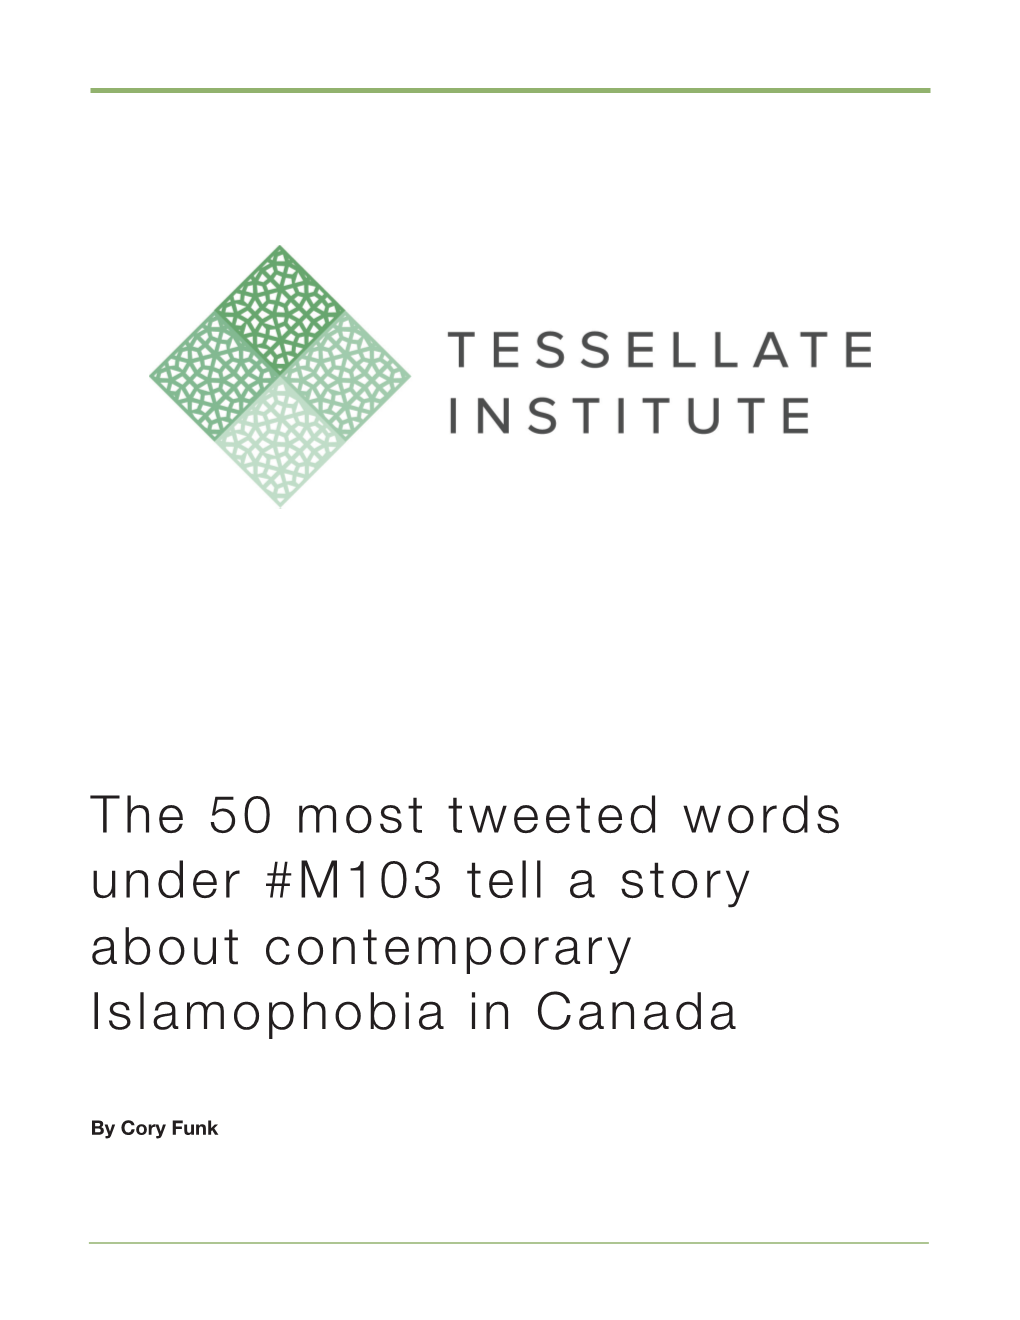 The 50 Most Tweeted Words Under #M103 Tell a Story About Contemporary Islamophobia in Canada